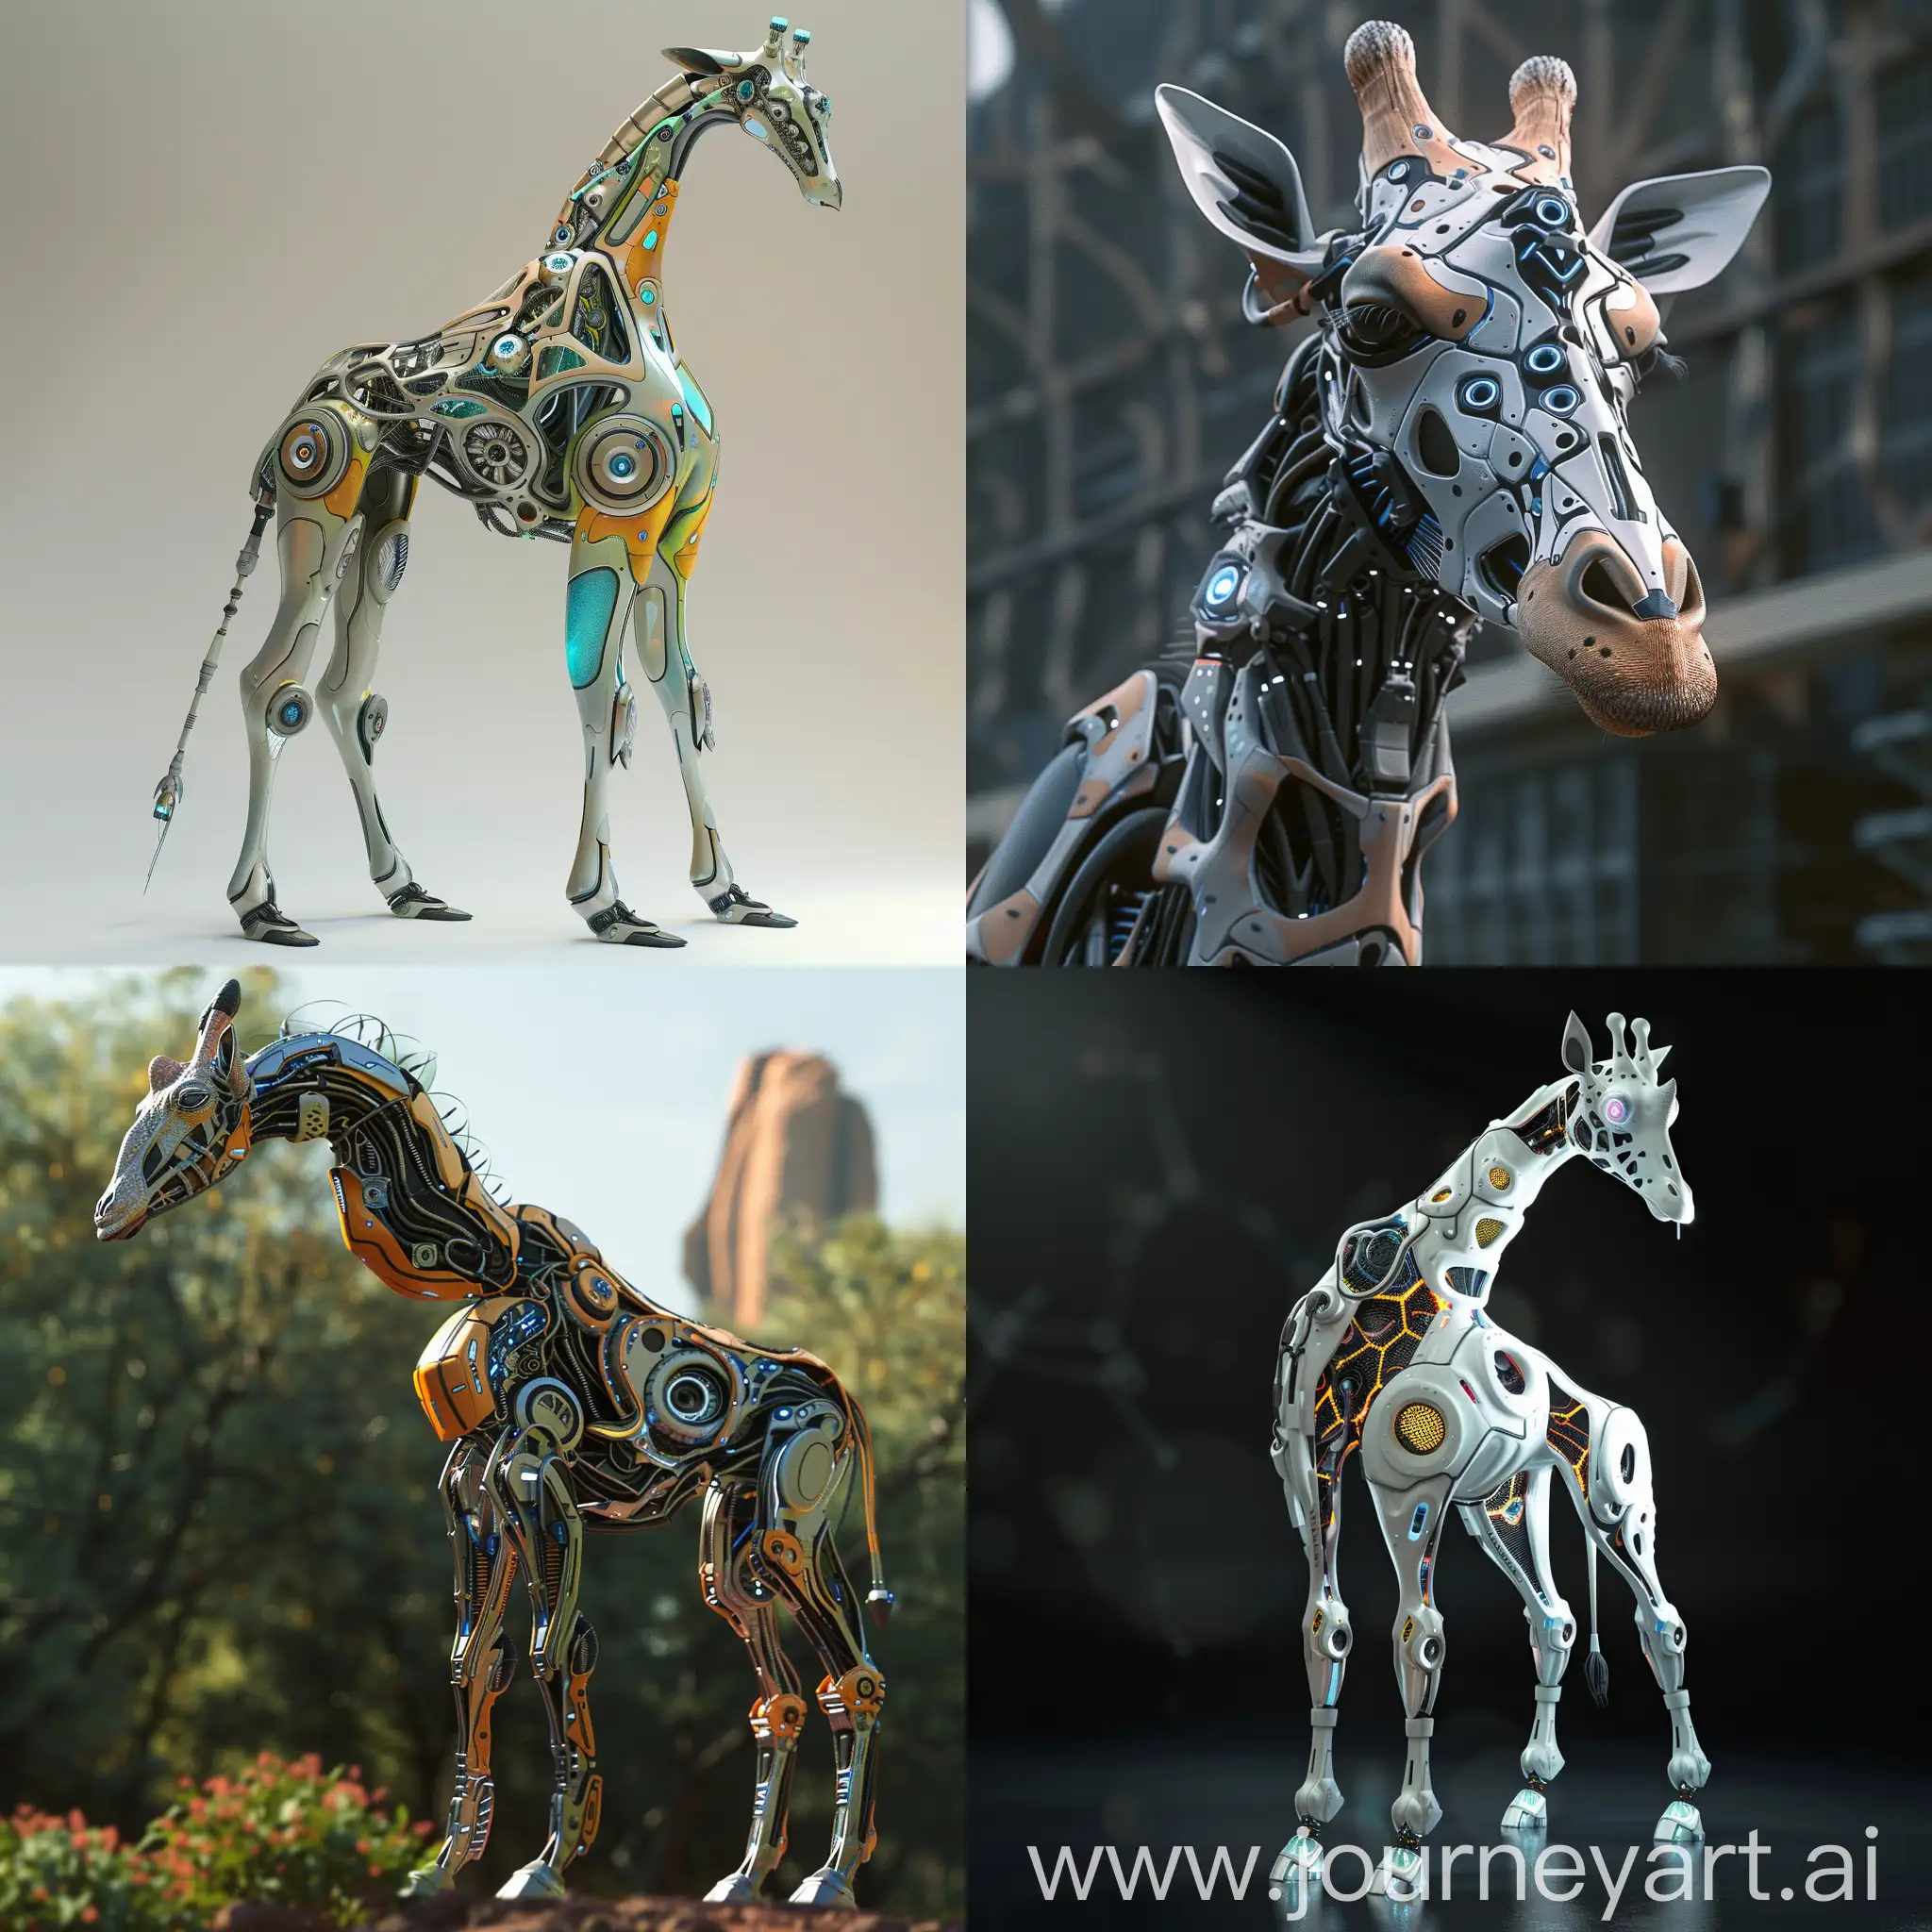 Futuristic-Giraffe-with-Cybernetic-Enhancements-and-Holographic-Features